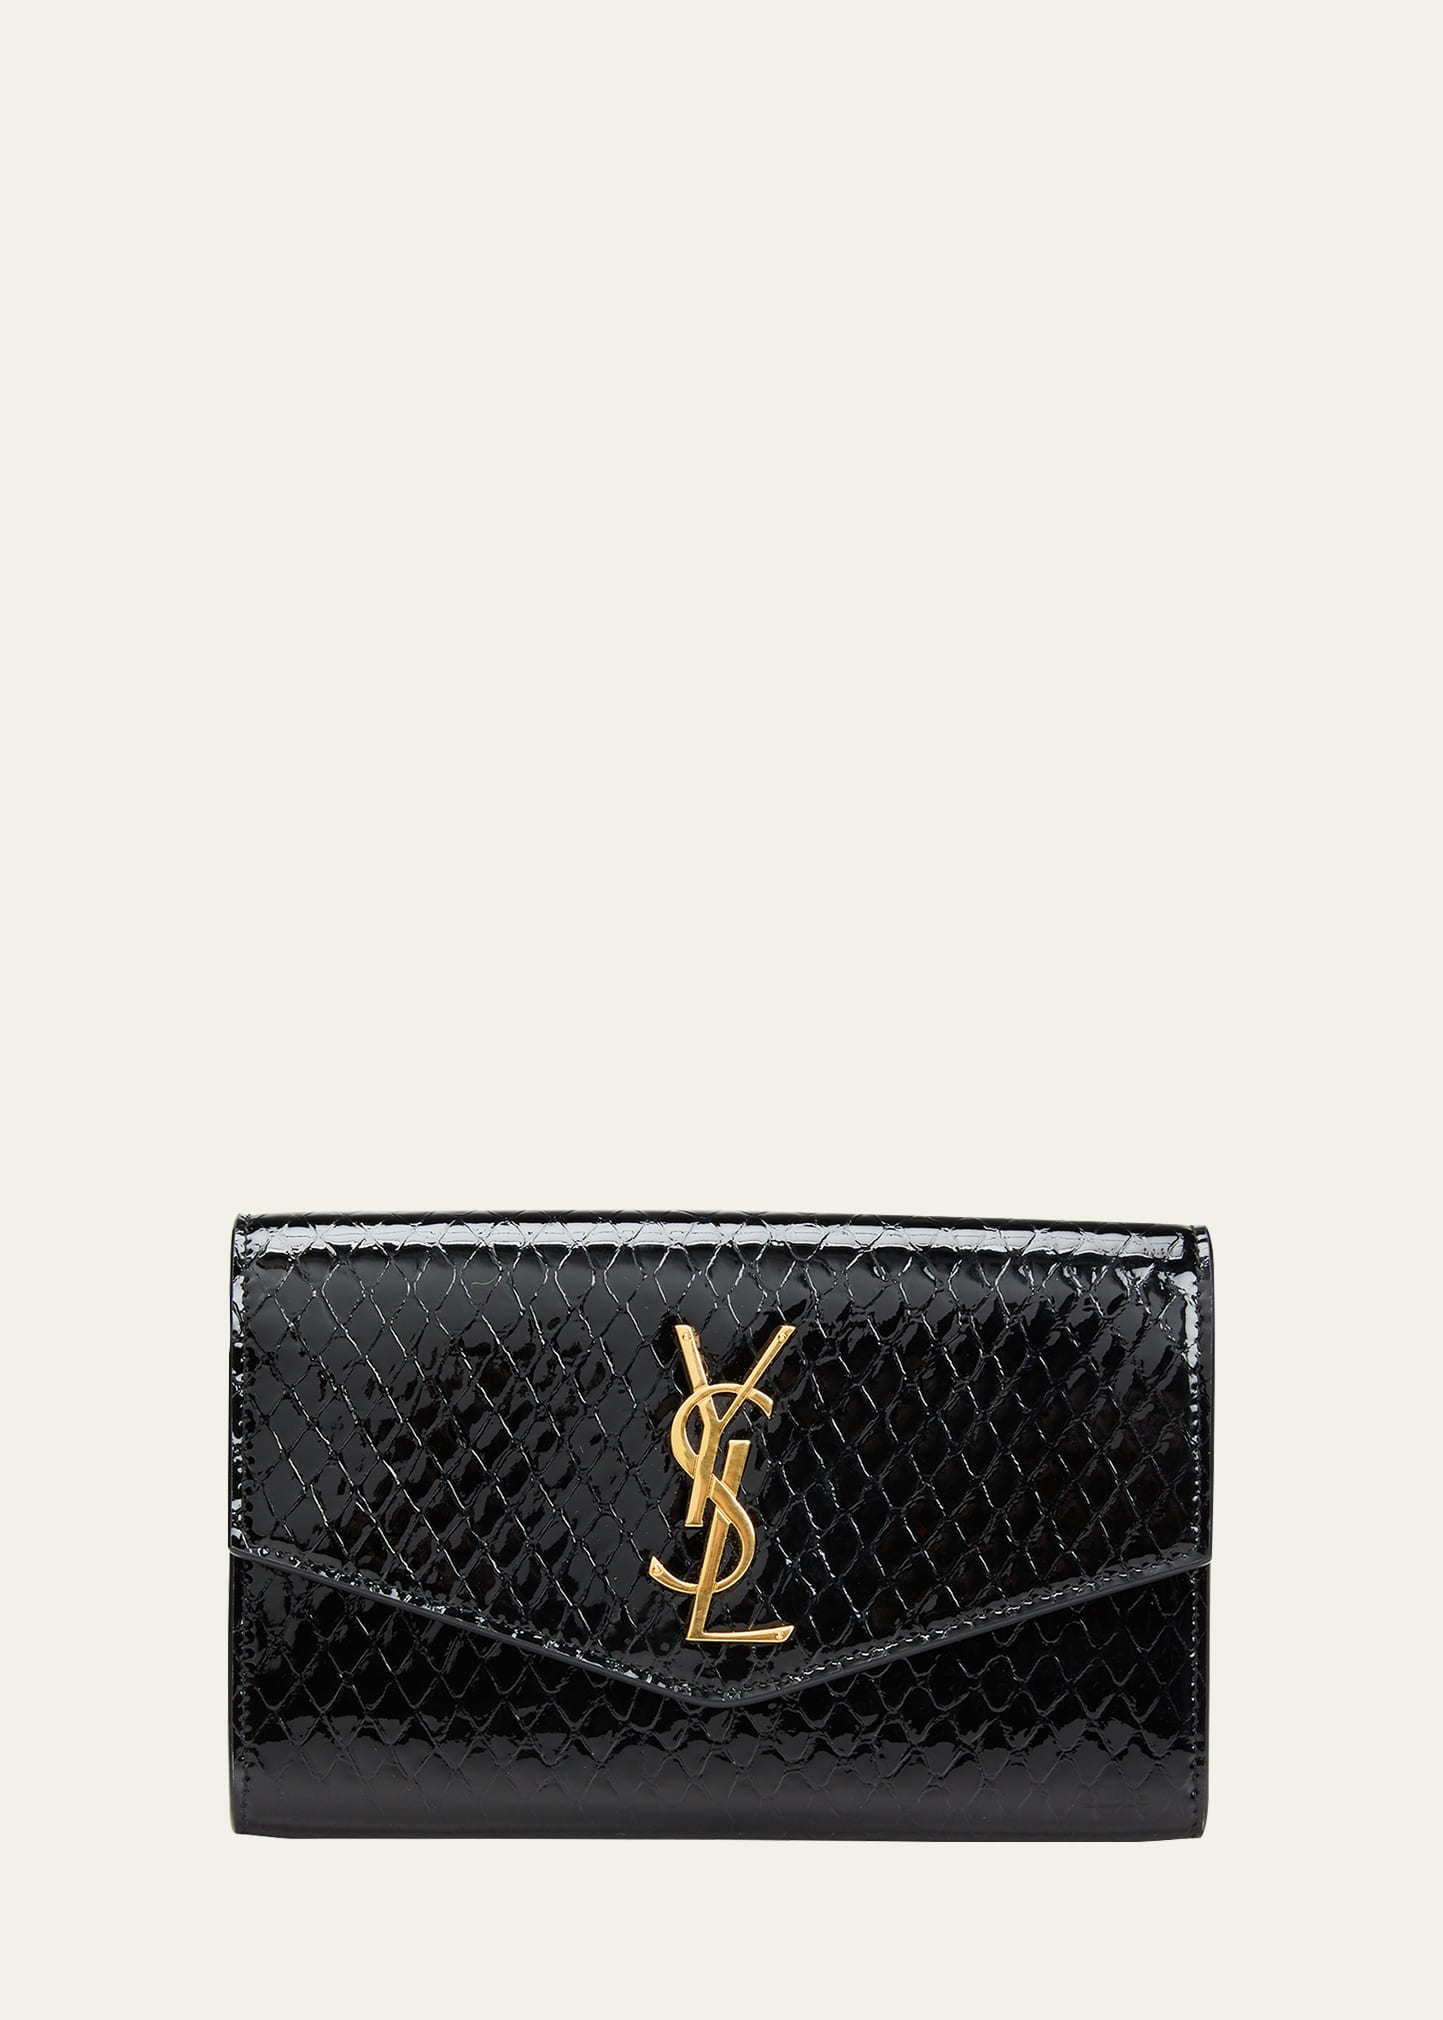 SAINT LAURENT UPTOWN YSL WALLET ON CHAIN IN PYTHON EMBOSSED LEATHER